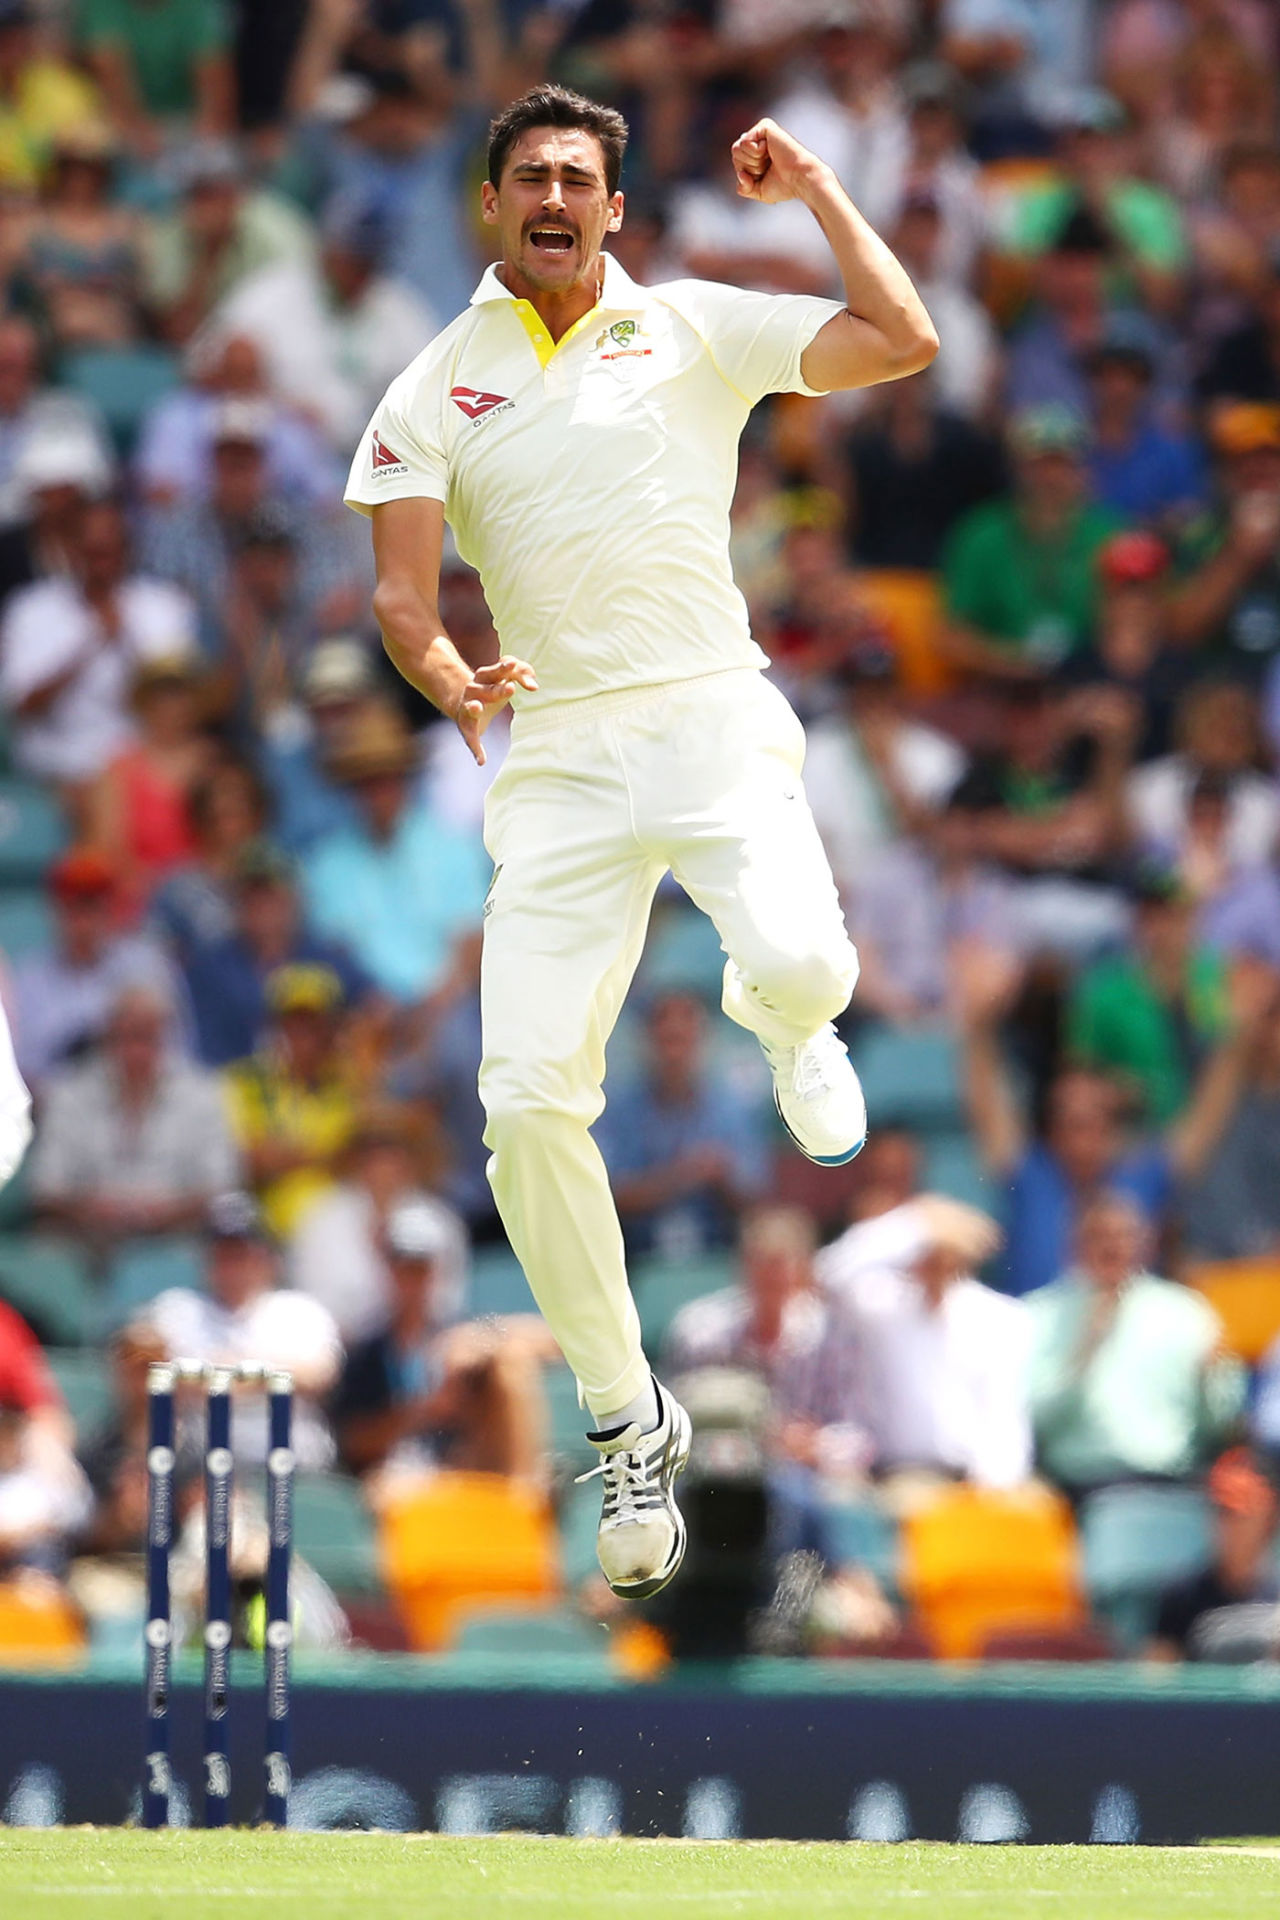 Mitchell Starc struck in his second over to remove Alastair Cook, Australia v England, 1st Test, The Ashes 2017-18, 1st day, Brisbane, November 23, 2017